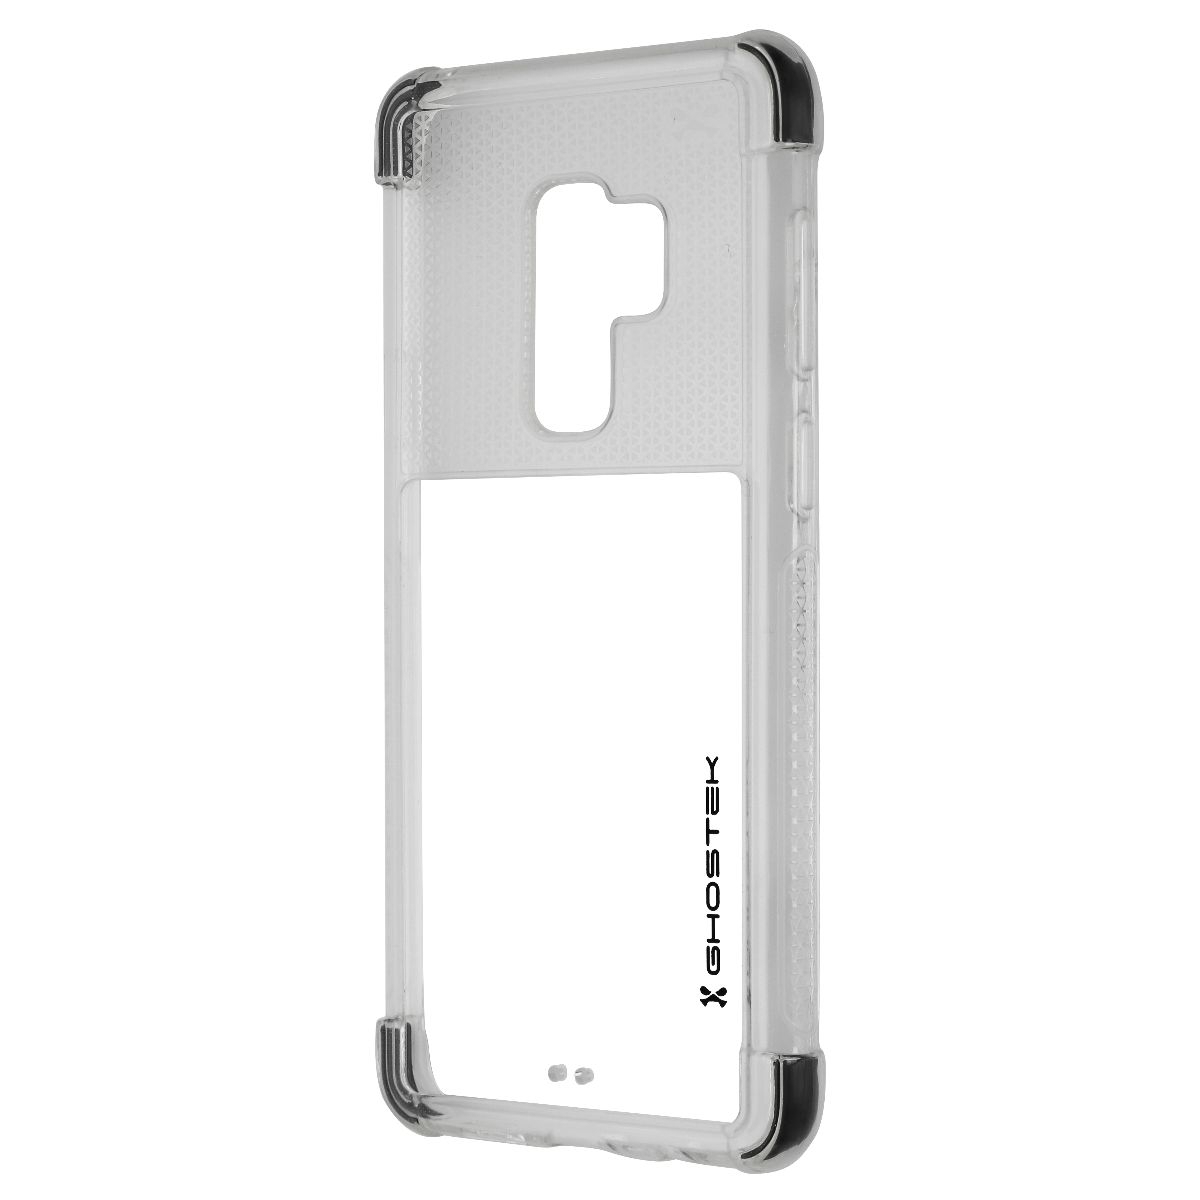 Ghostek Covert2 Protective Case For Samsung Galaxy (S9+) - Clear / Black (Refurbished)